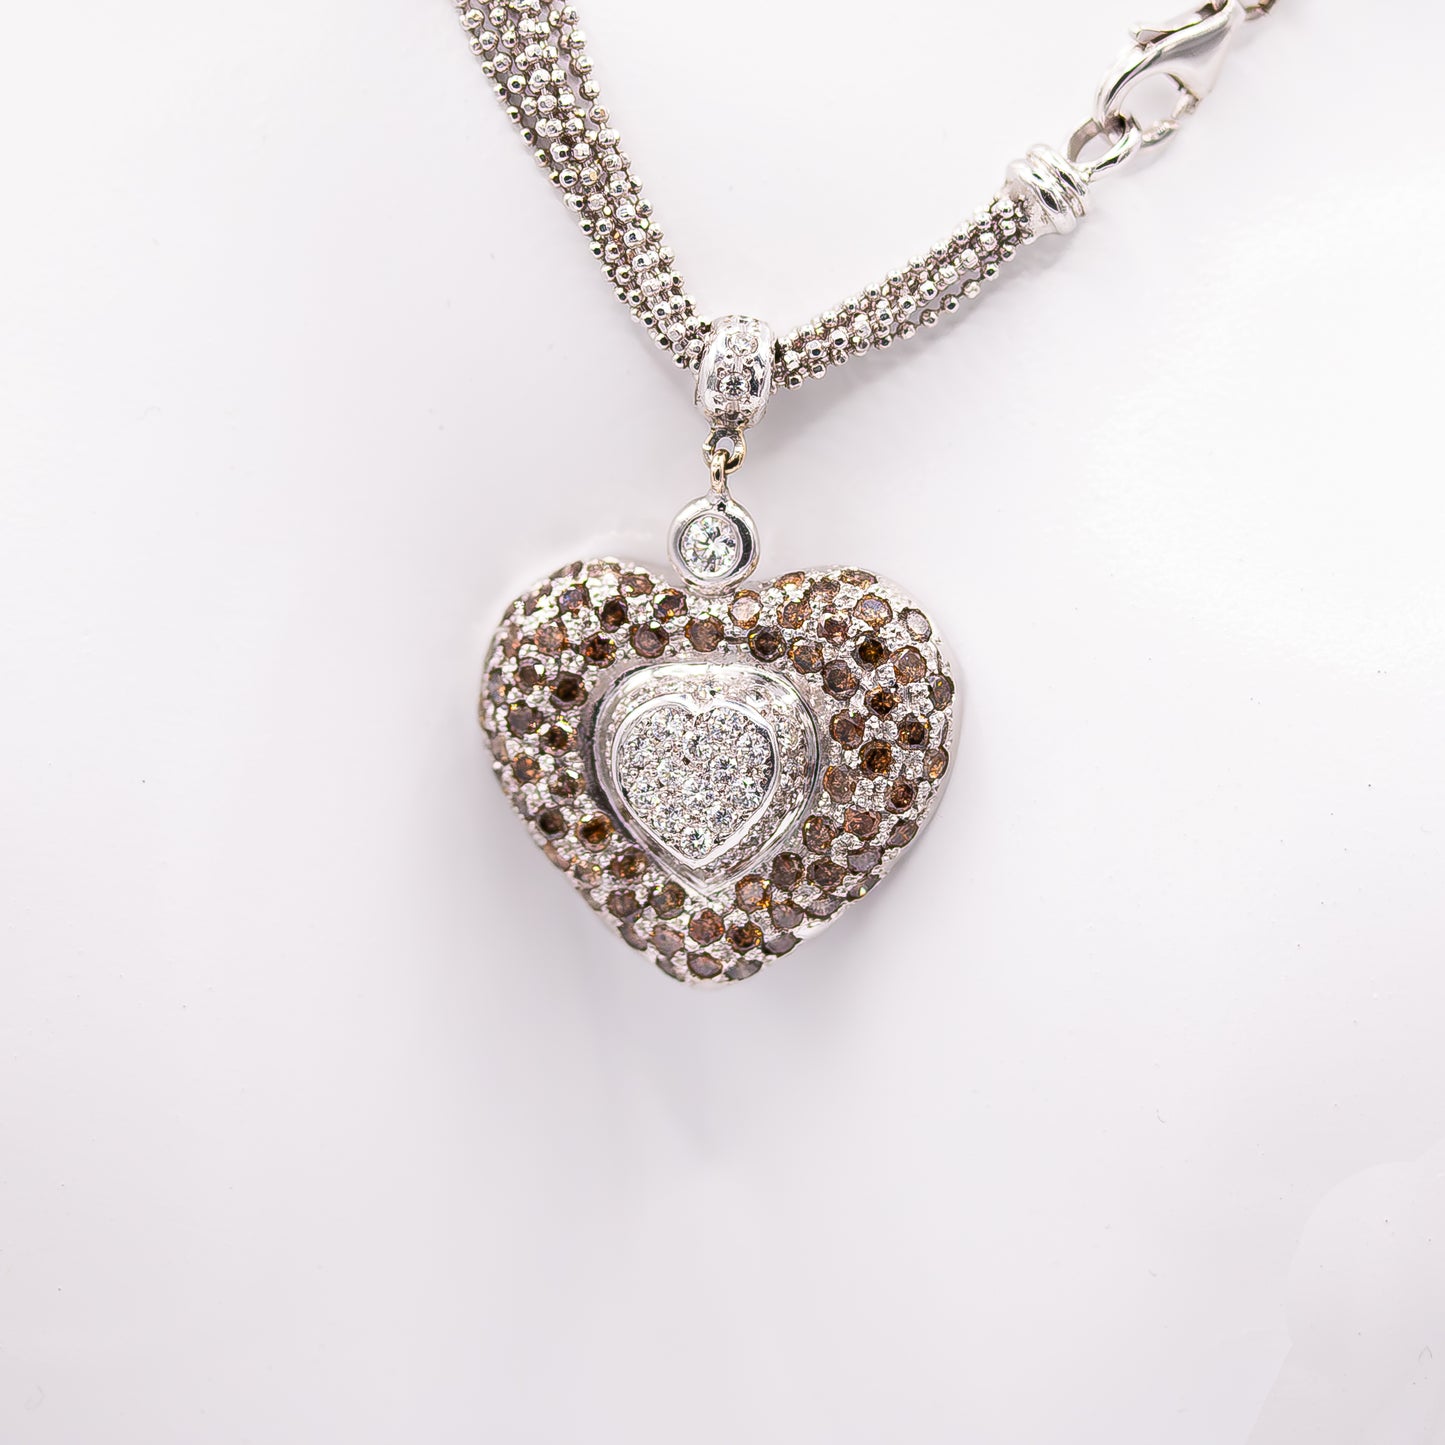 White and Brown Diamond Necklace